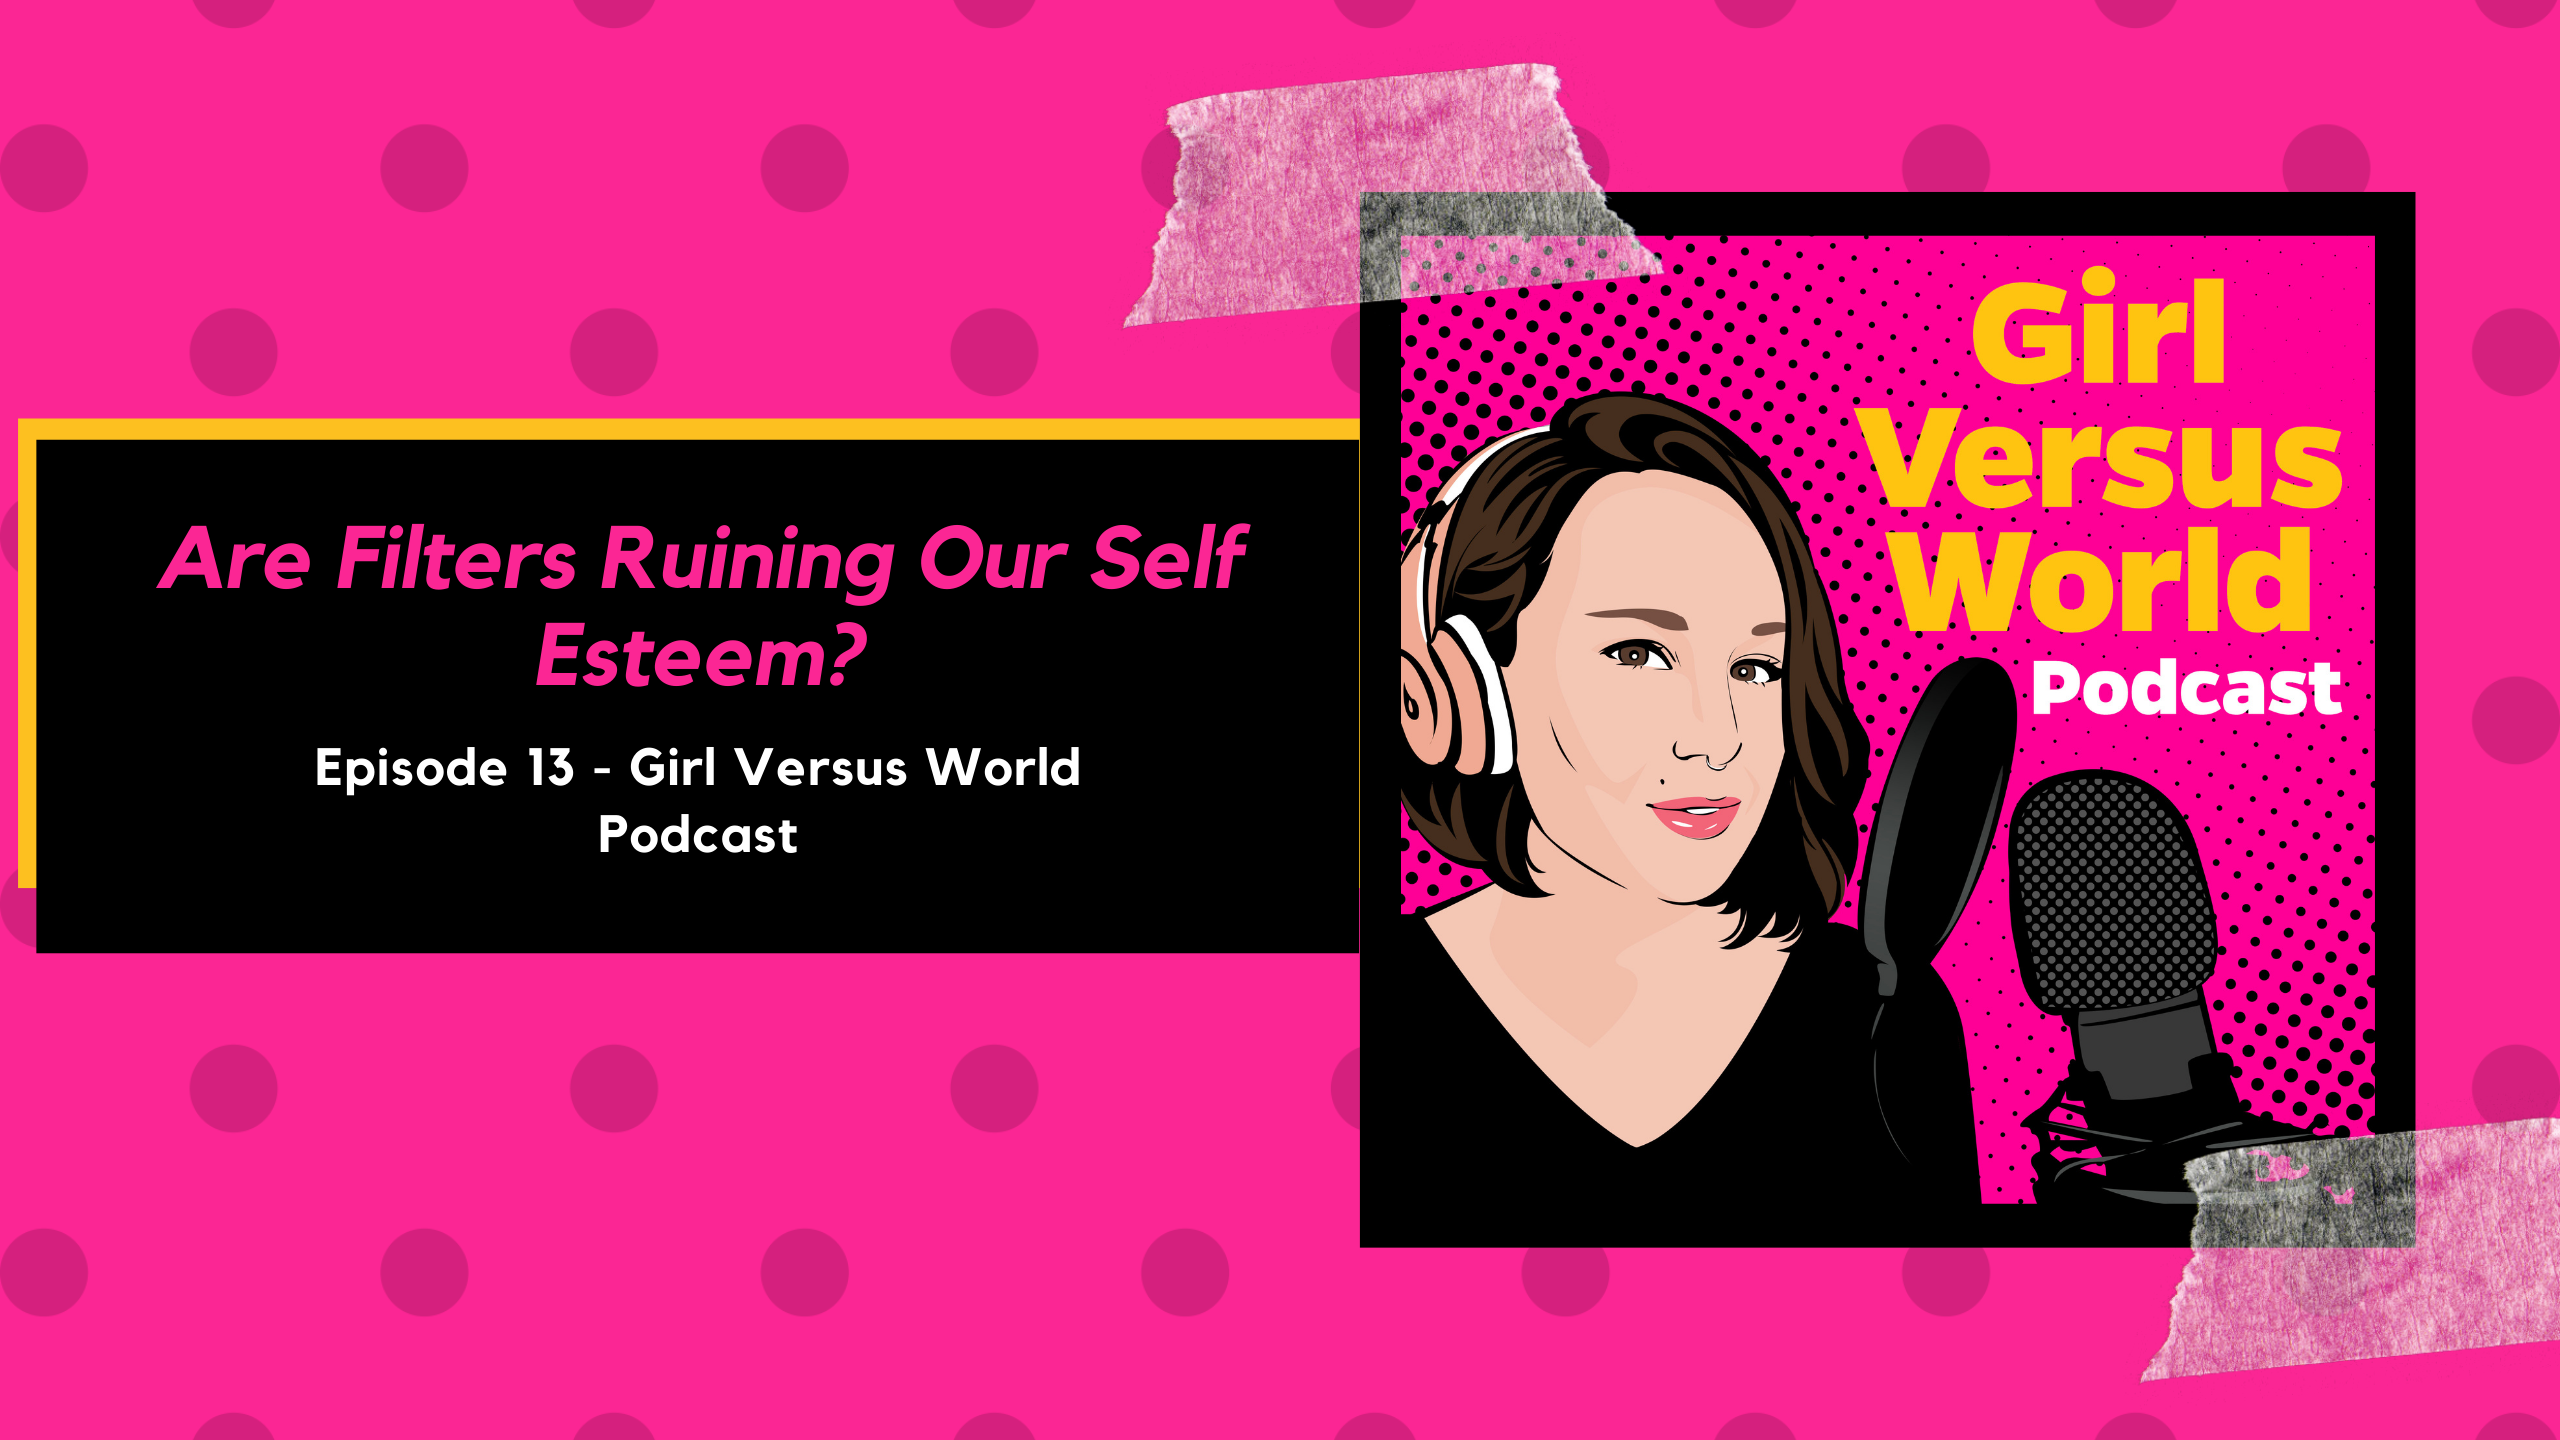 Podcast Episode 13: Are Filters Ruining Our Self Esteem?